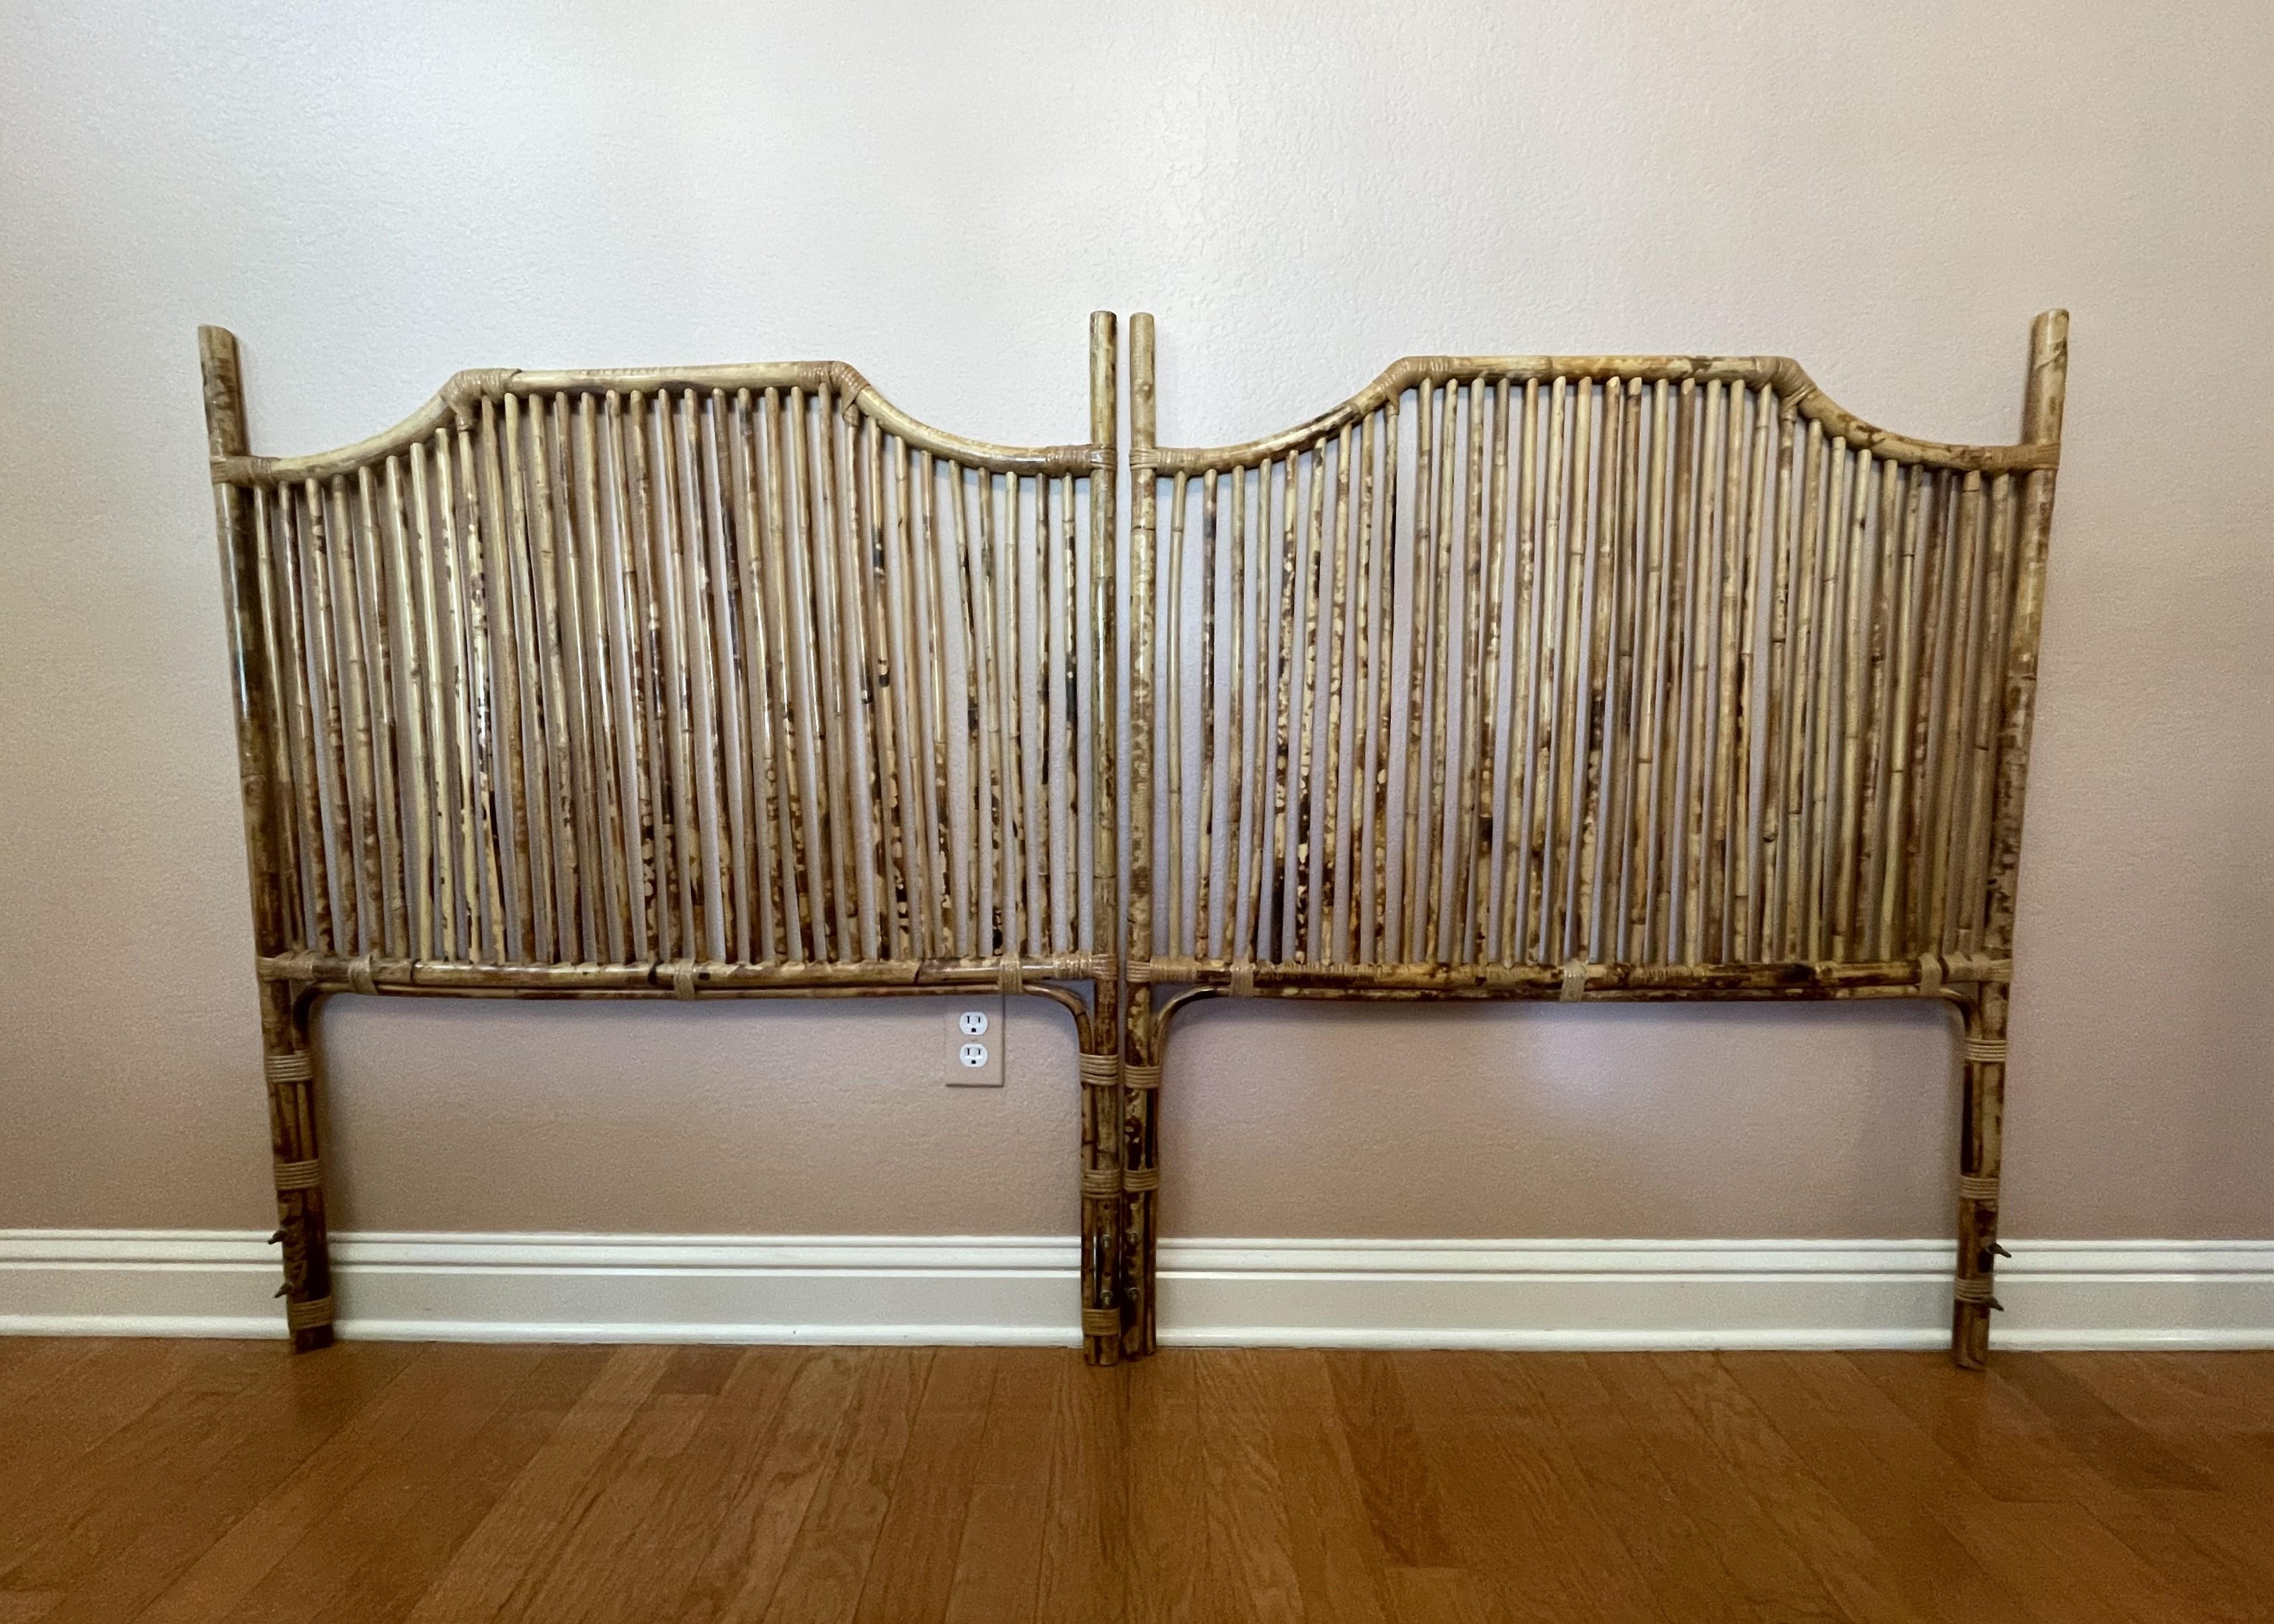 Indonesian Mid-20th Century Tortoise-Bamboo and Rattan Headboards -- A Pair For Sale